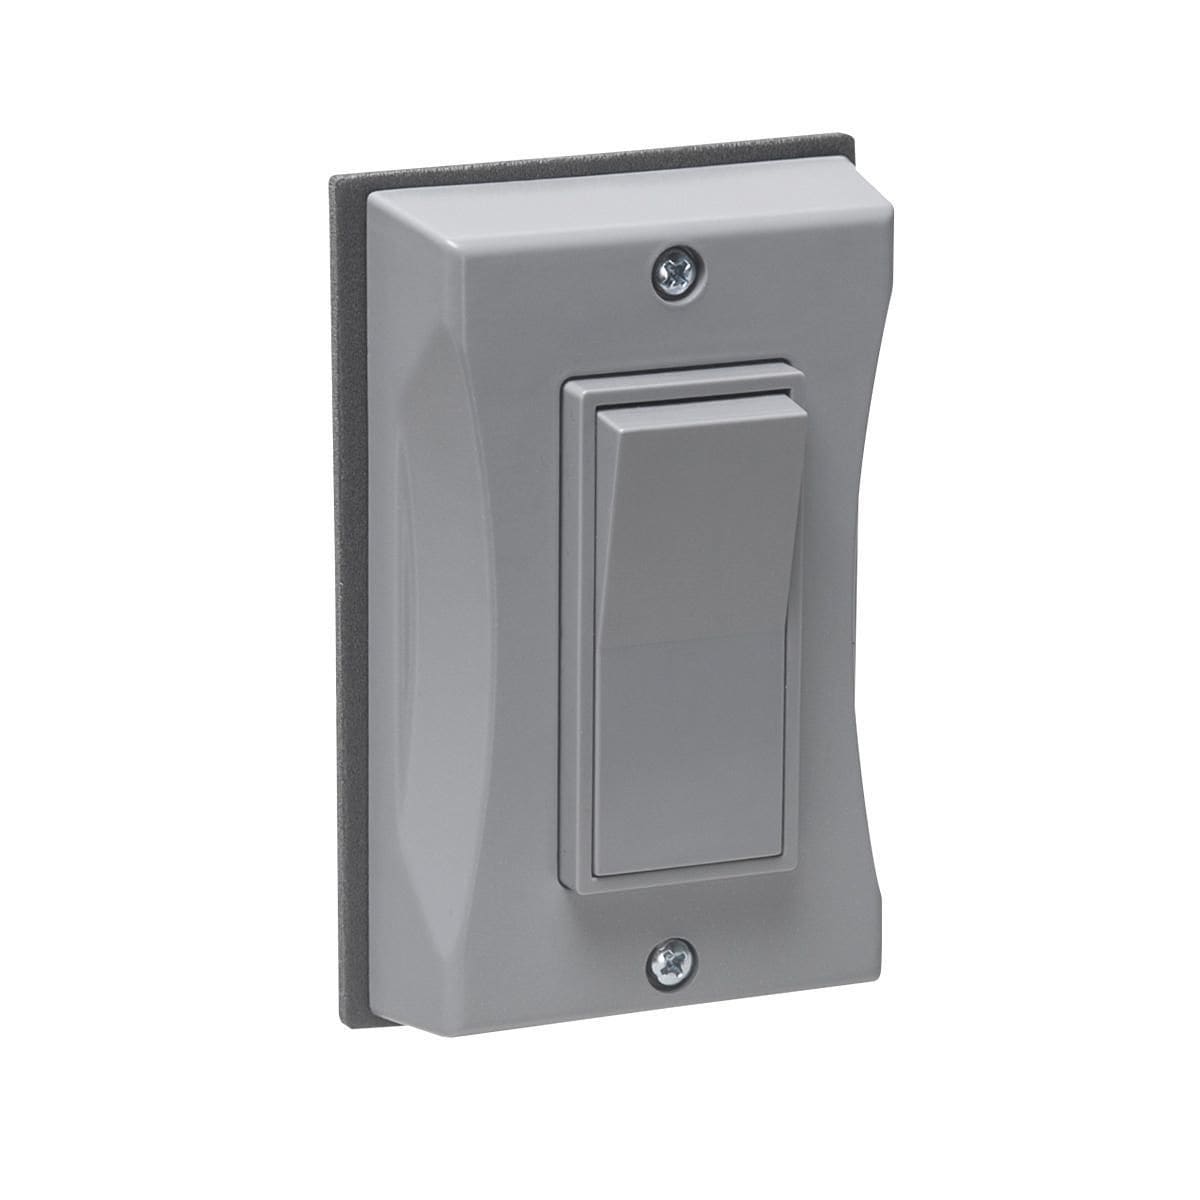 Hubbell 5122-0 Weatherproof Outdoor Rocker Switch Cover With Switch Grey 